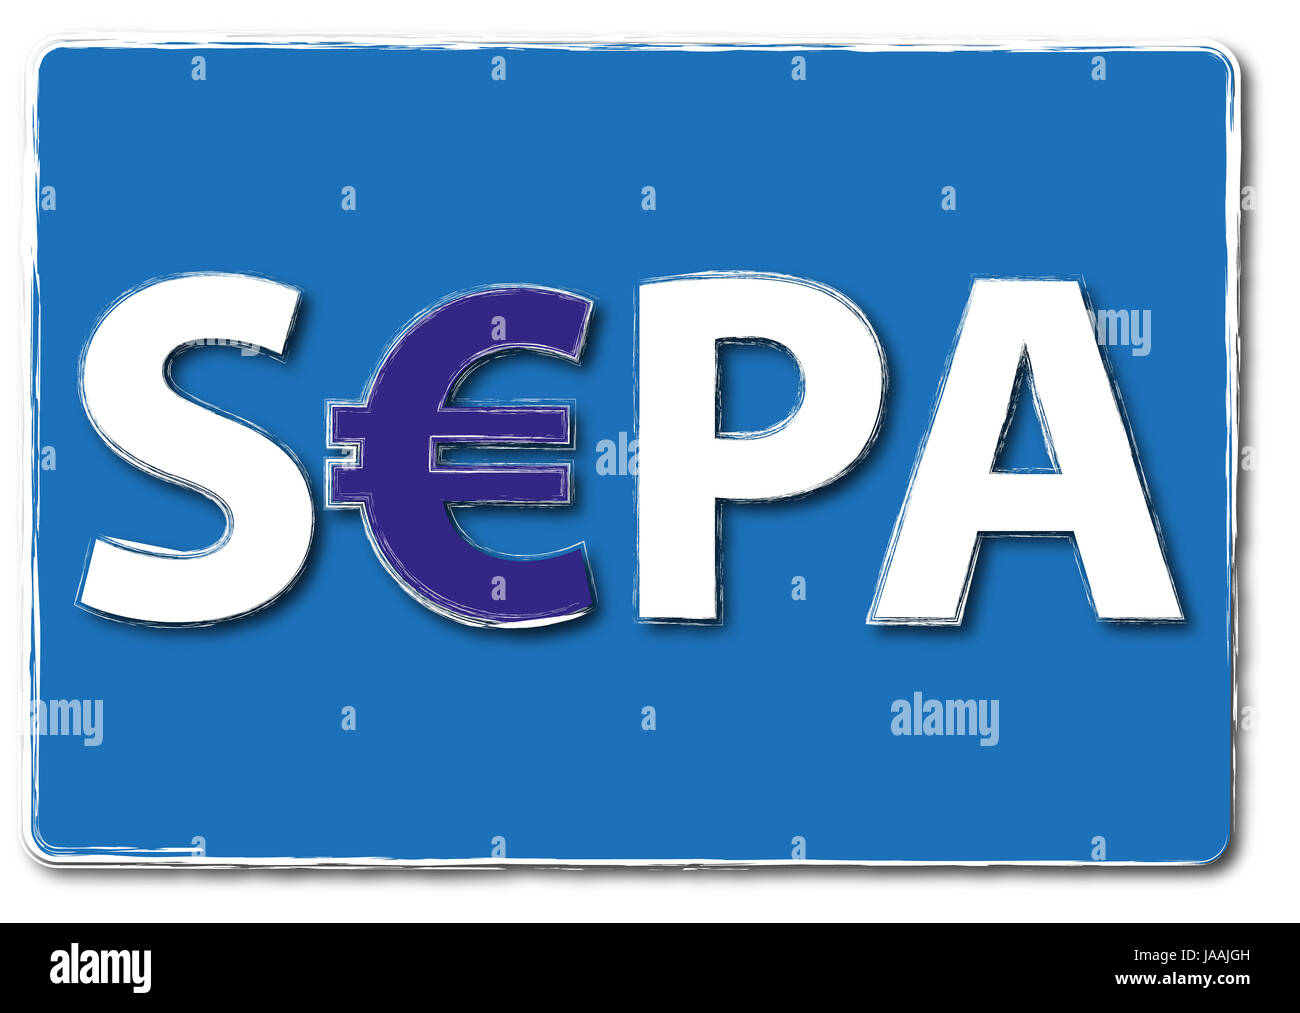 bank, lending institution, blue, pay, graphic, new, euro, currency, europe, Stock Photo